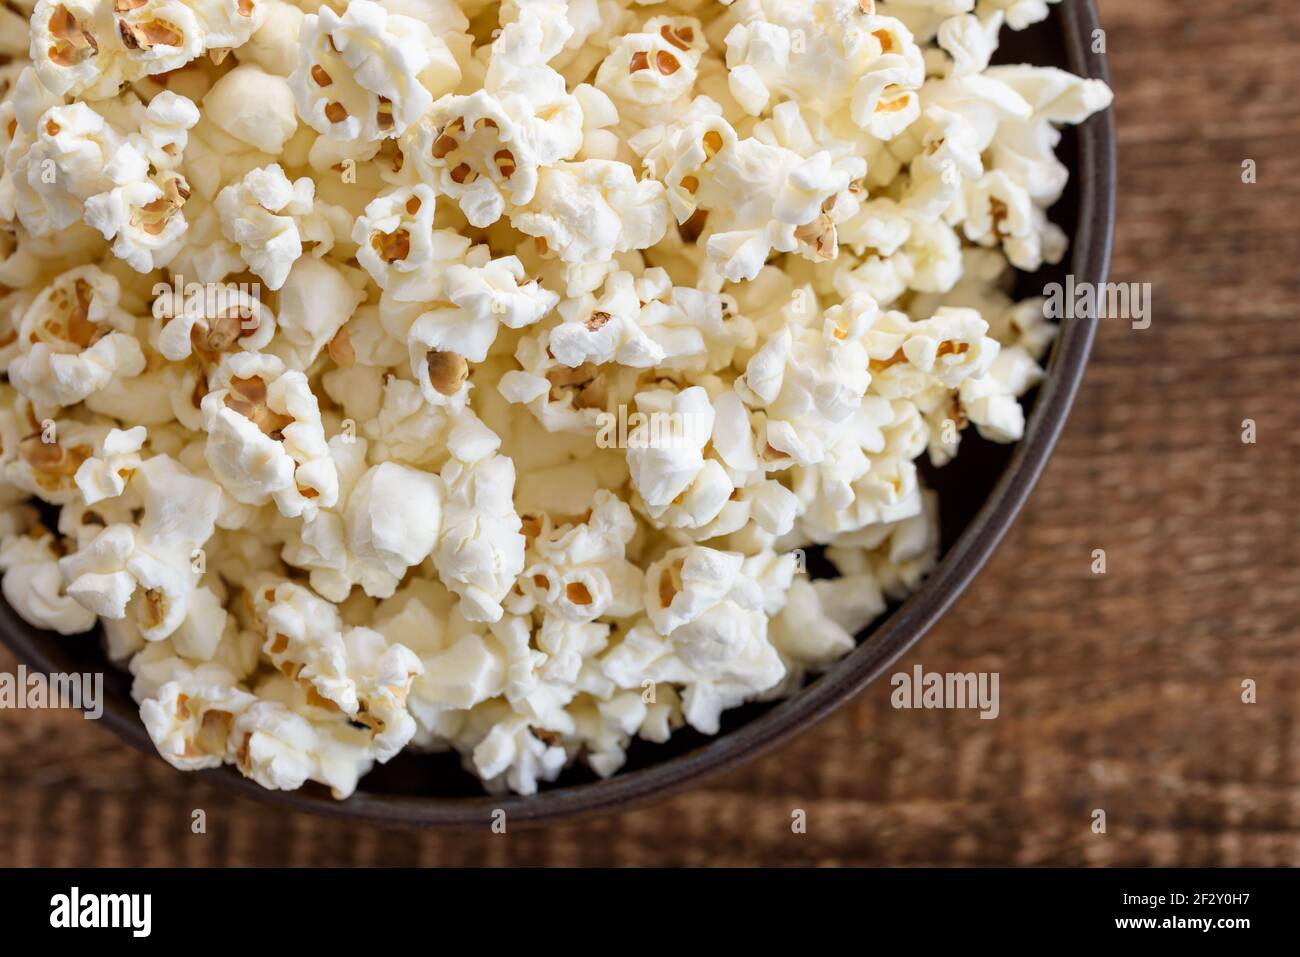 A bowl of popcorn, top-view, warm colors, light brown wooden background, flat lay, daylight macro close-up Stock Photo